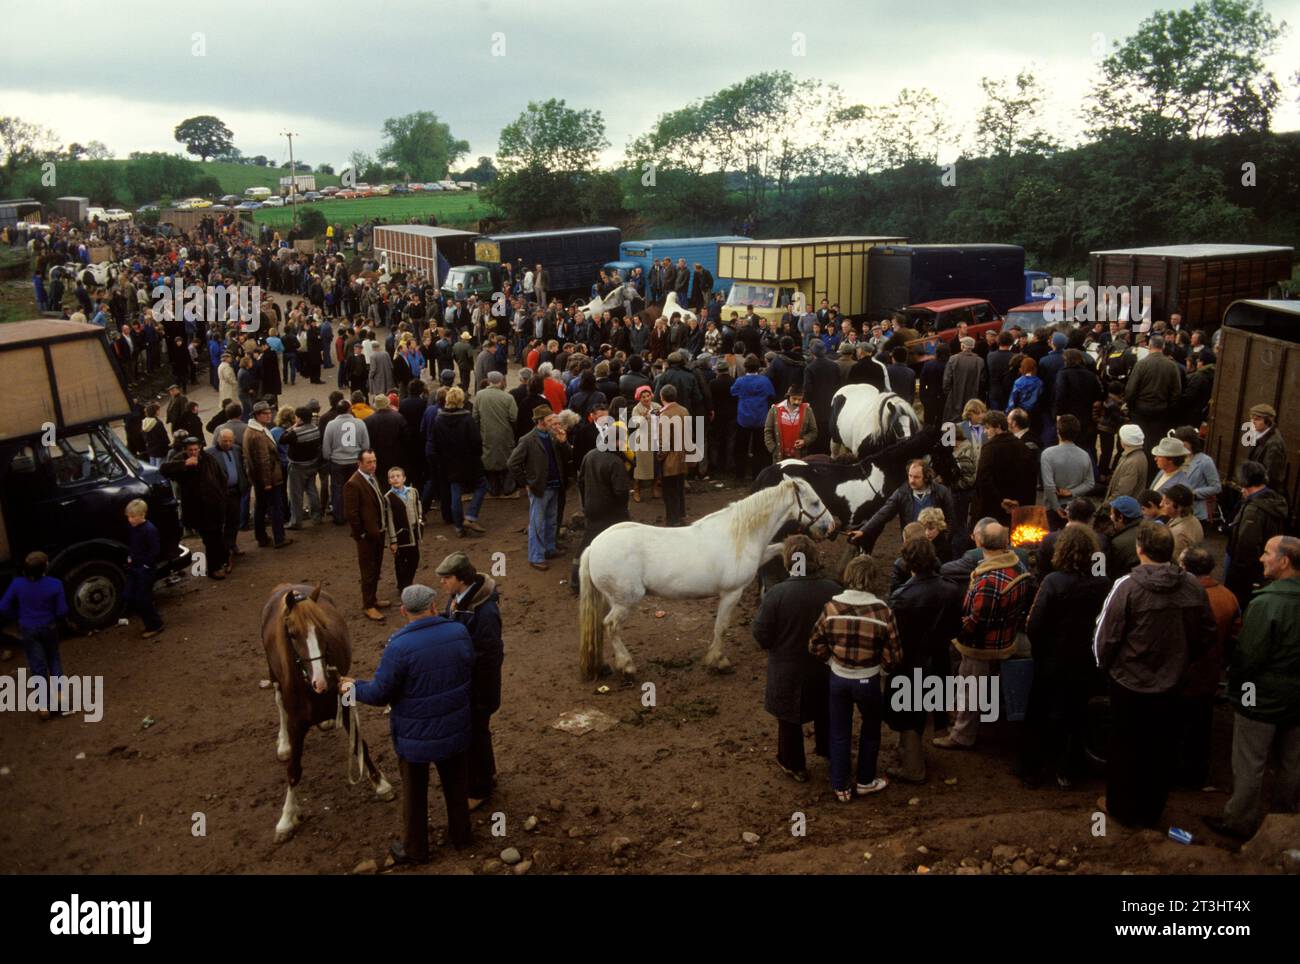 Horse dealers and gypsies gather to buy and sell horses at the annual Appleby Horse Fair. The best get sold on to horse loving families while many of the rest make their way to Europe and in particular France as viande chevaline which is a significant part of their culinary tradition. Appleby in Westmorland gypsy horse fair Cumbria, England June 1985 1980s UK Charter fair granted by King James II 1685 HOMER SYKES Stock Photo